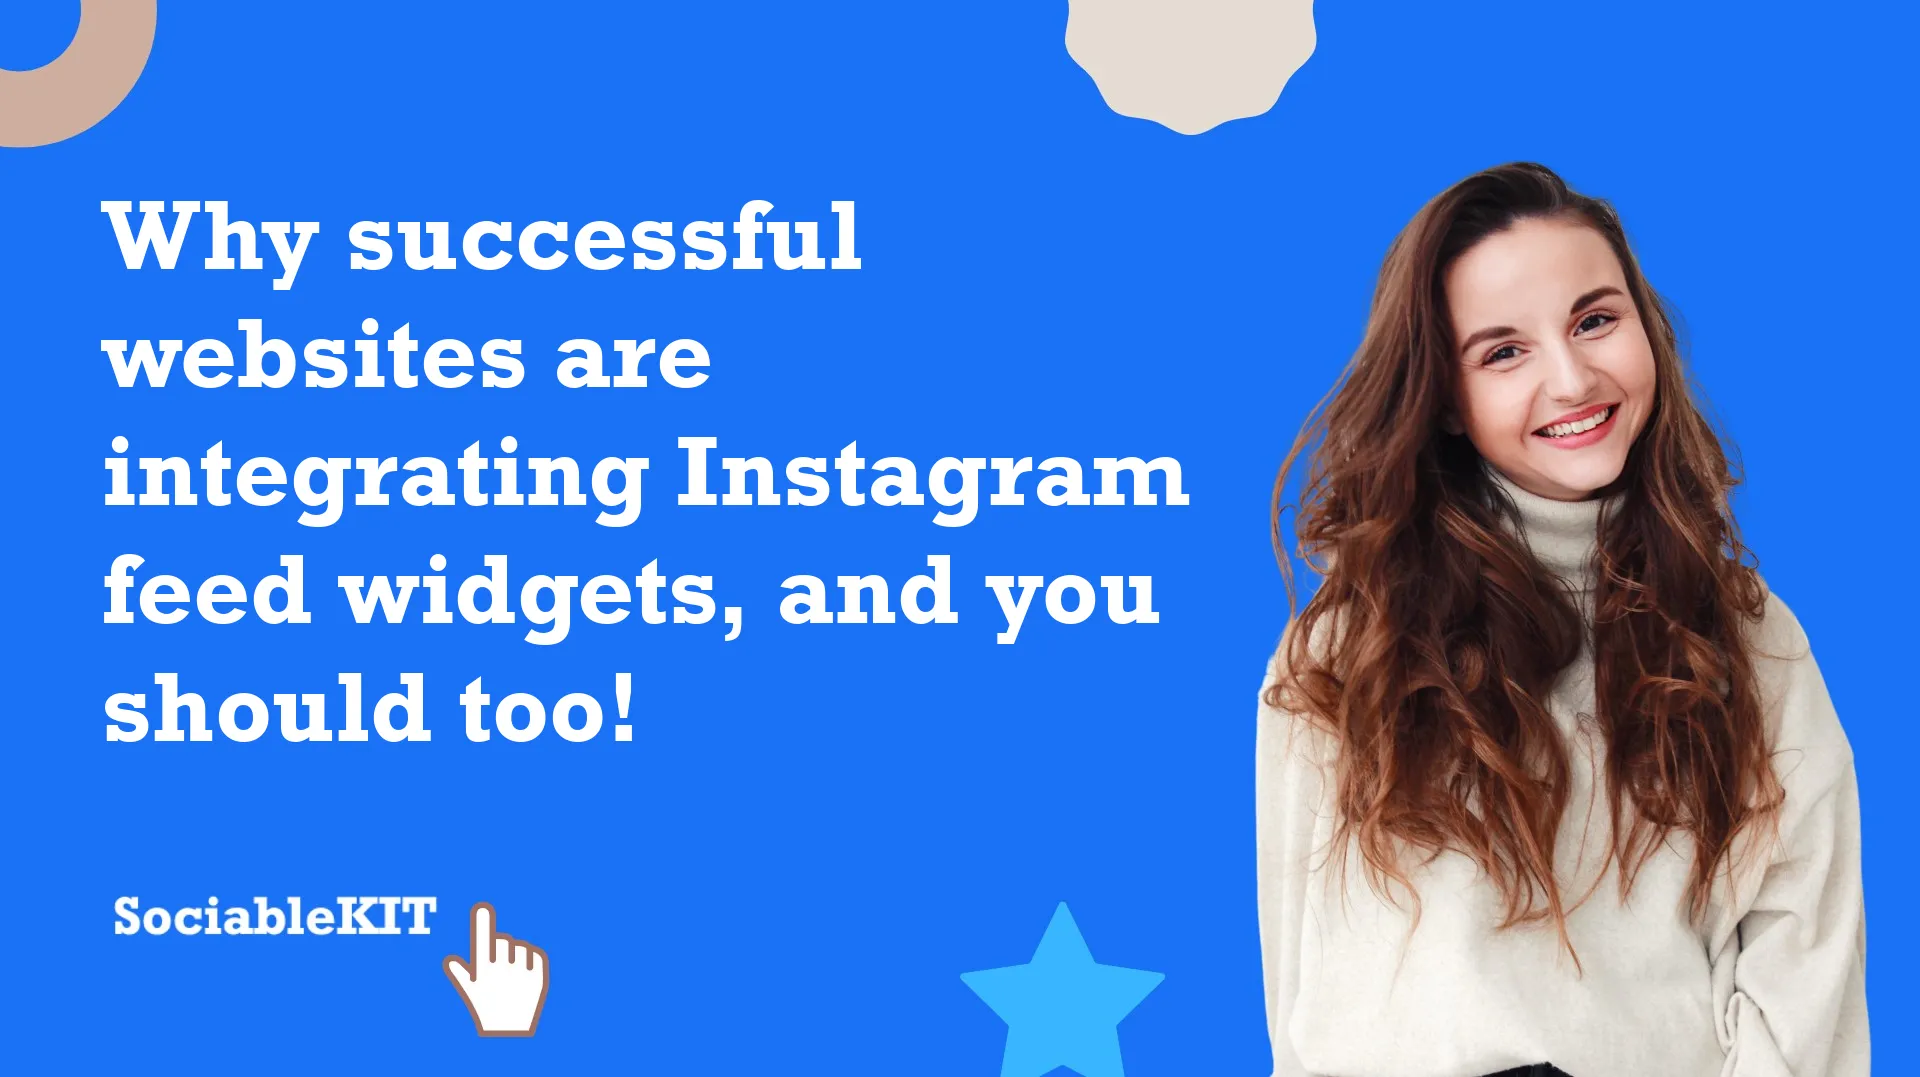 Why successful websites are integrating Instagram feed widgets, and you should too!